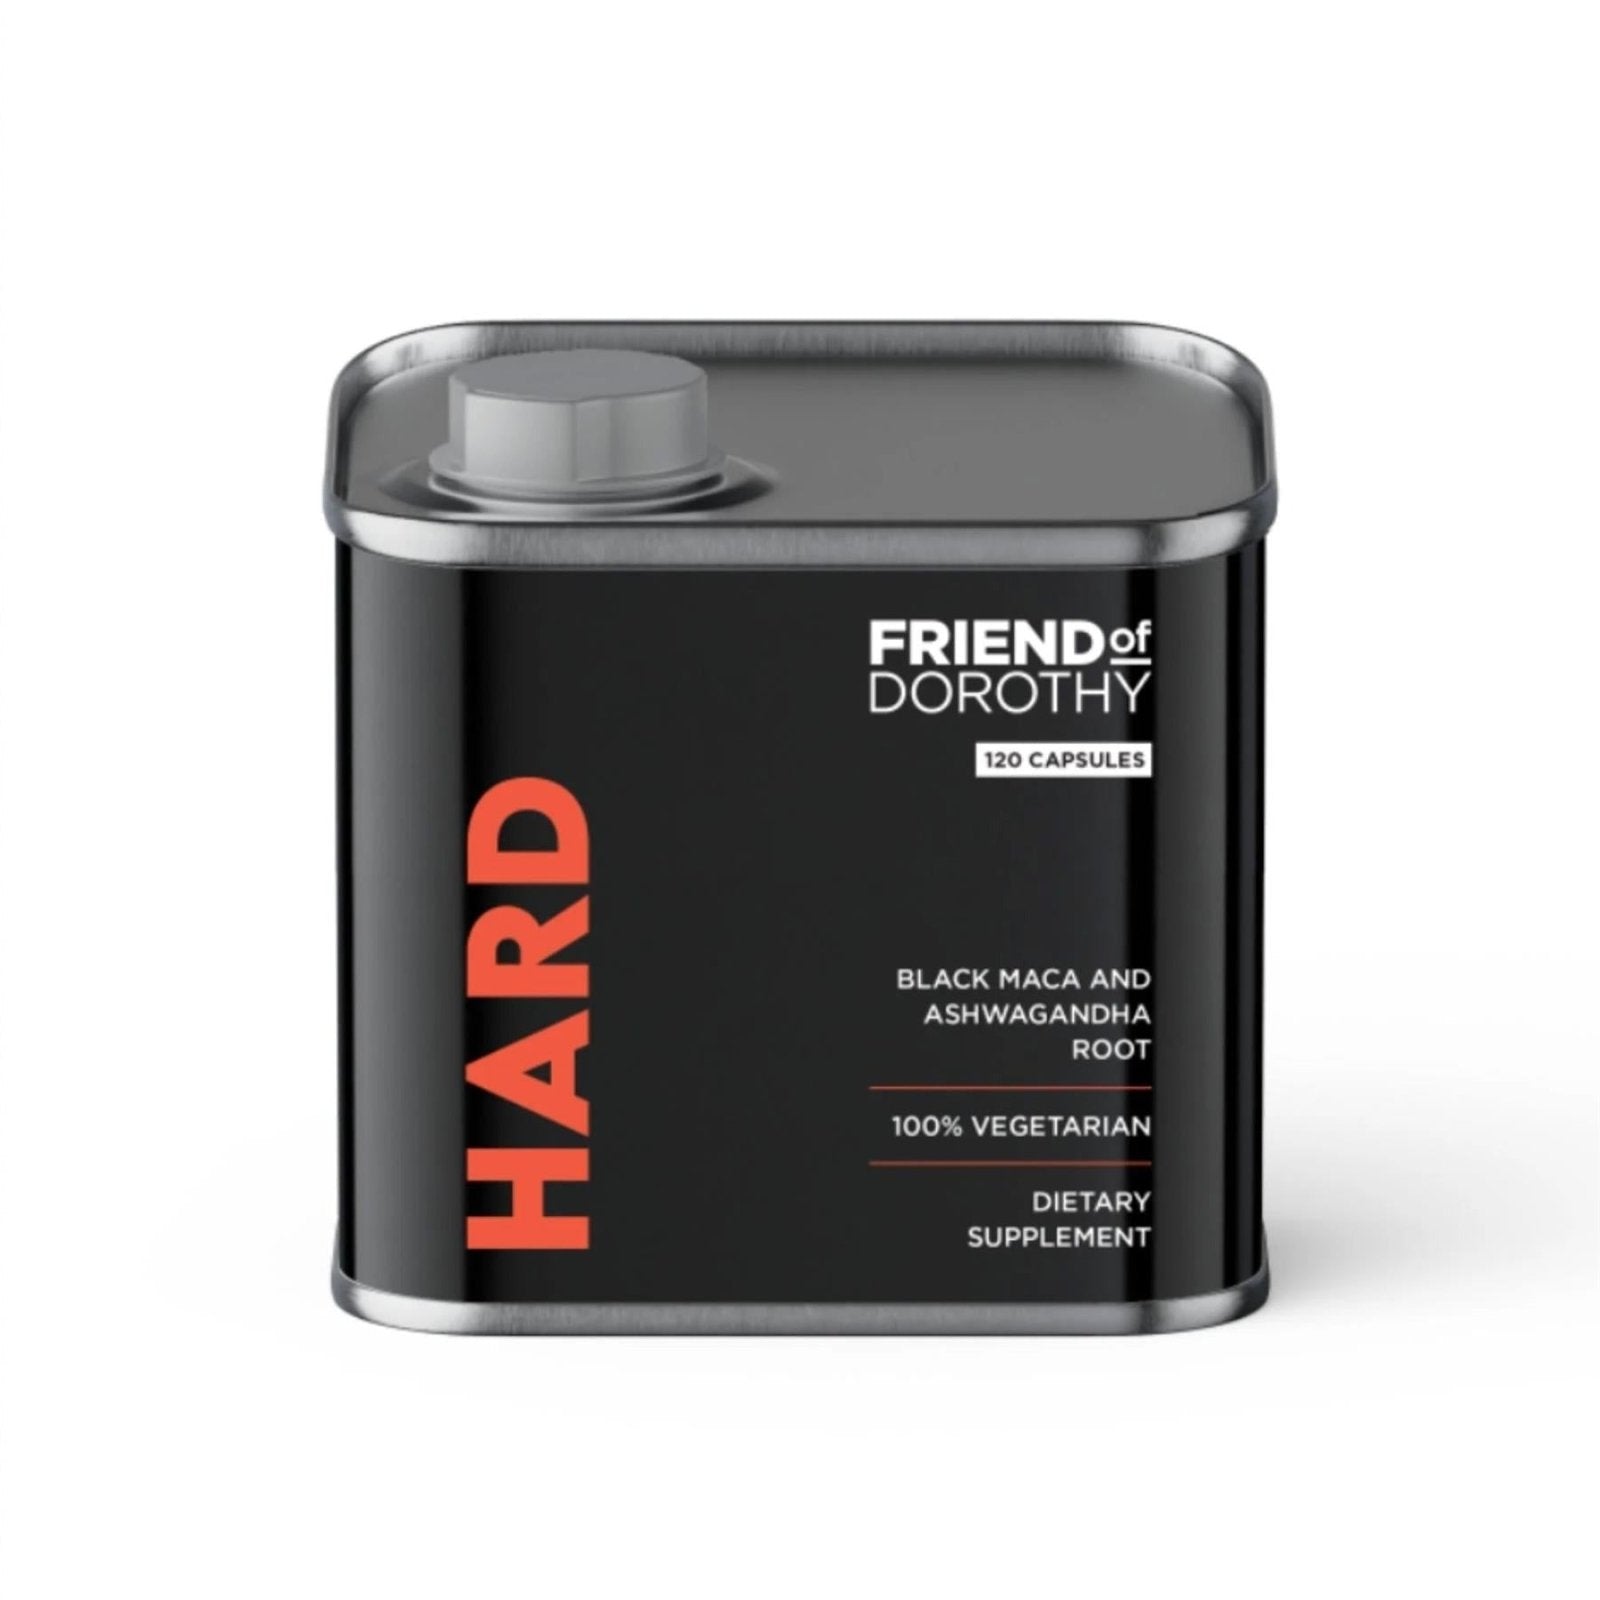 FRIEND OF DOROTHY HARD, Natural Libido Booster, 120 capsules from Friend of Dorothy.